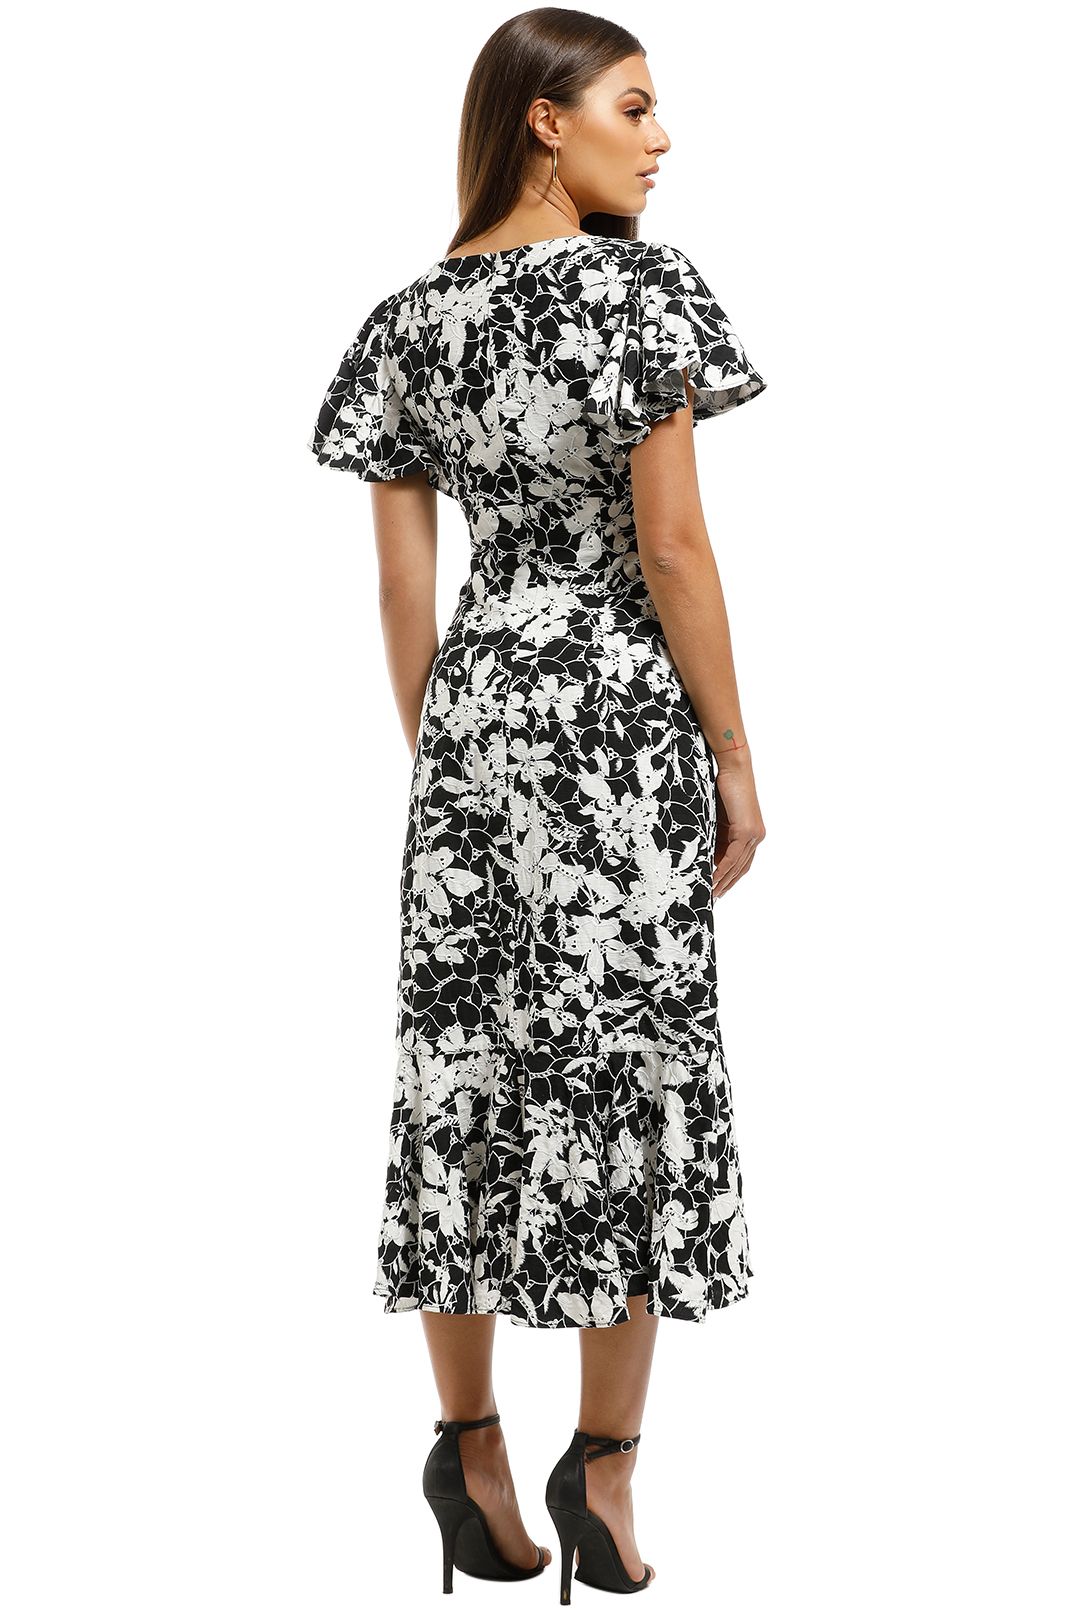 Talulah-The-Idol-Midi-Dress-Camille-Floral-Back